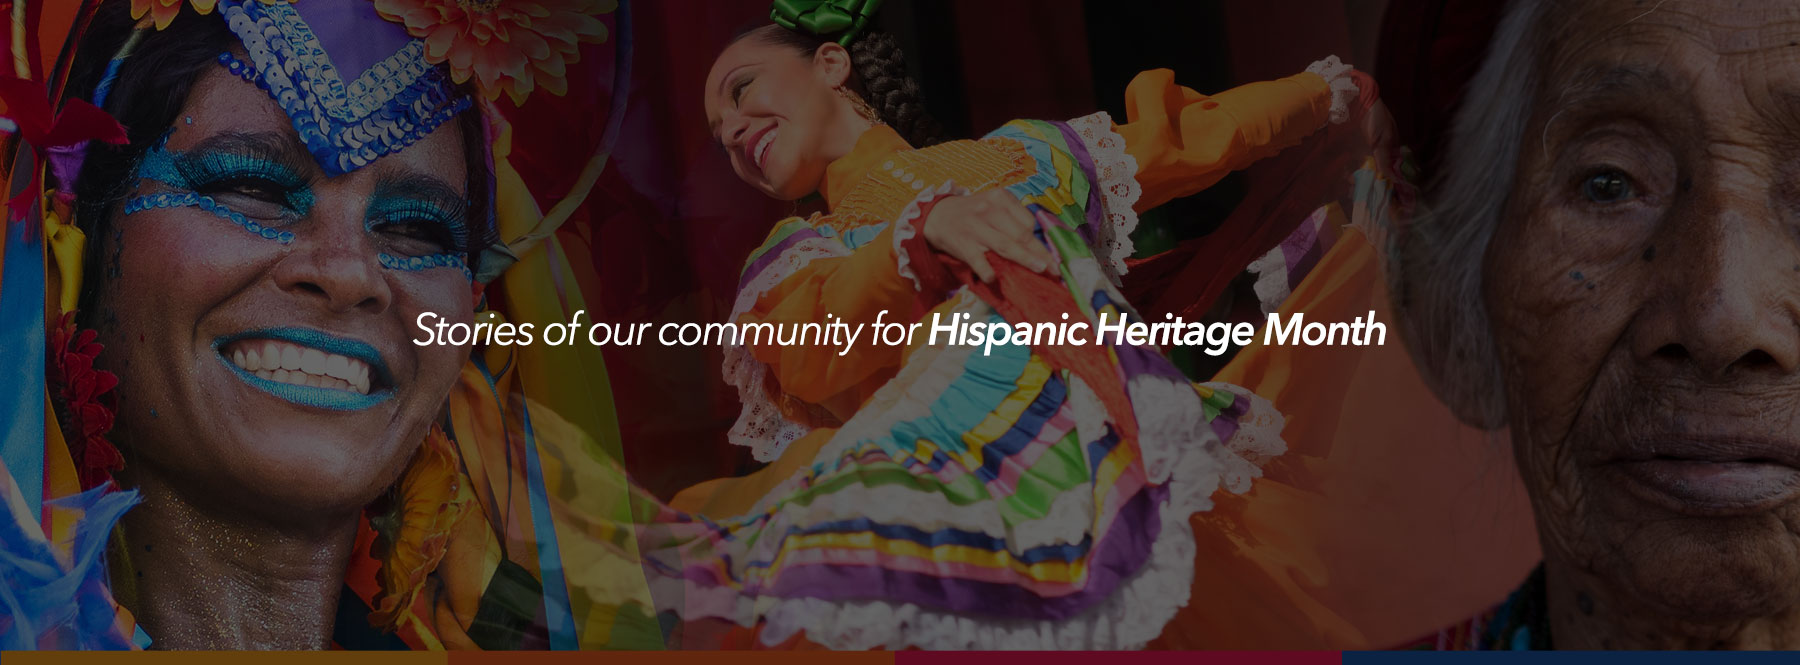 Stories of our community for Hispanic Heritage Month